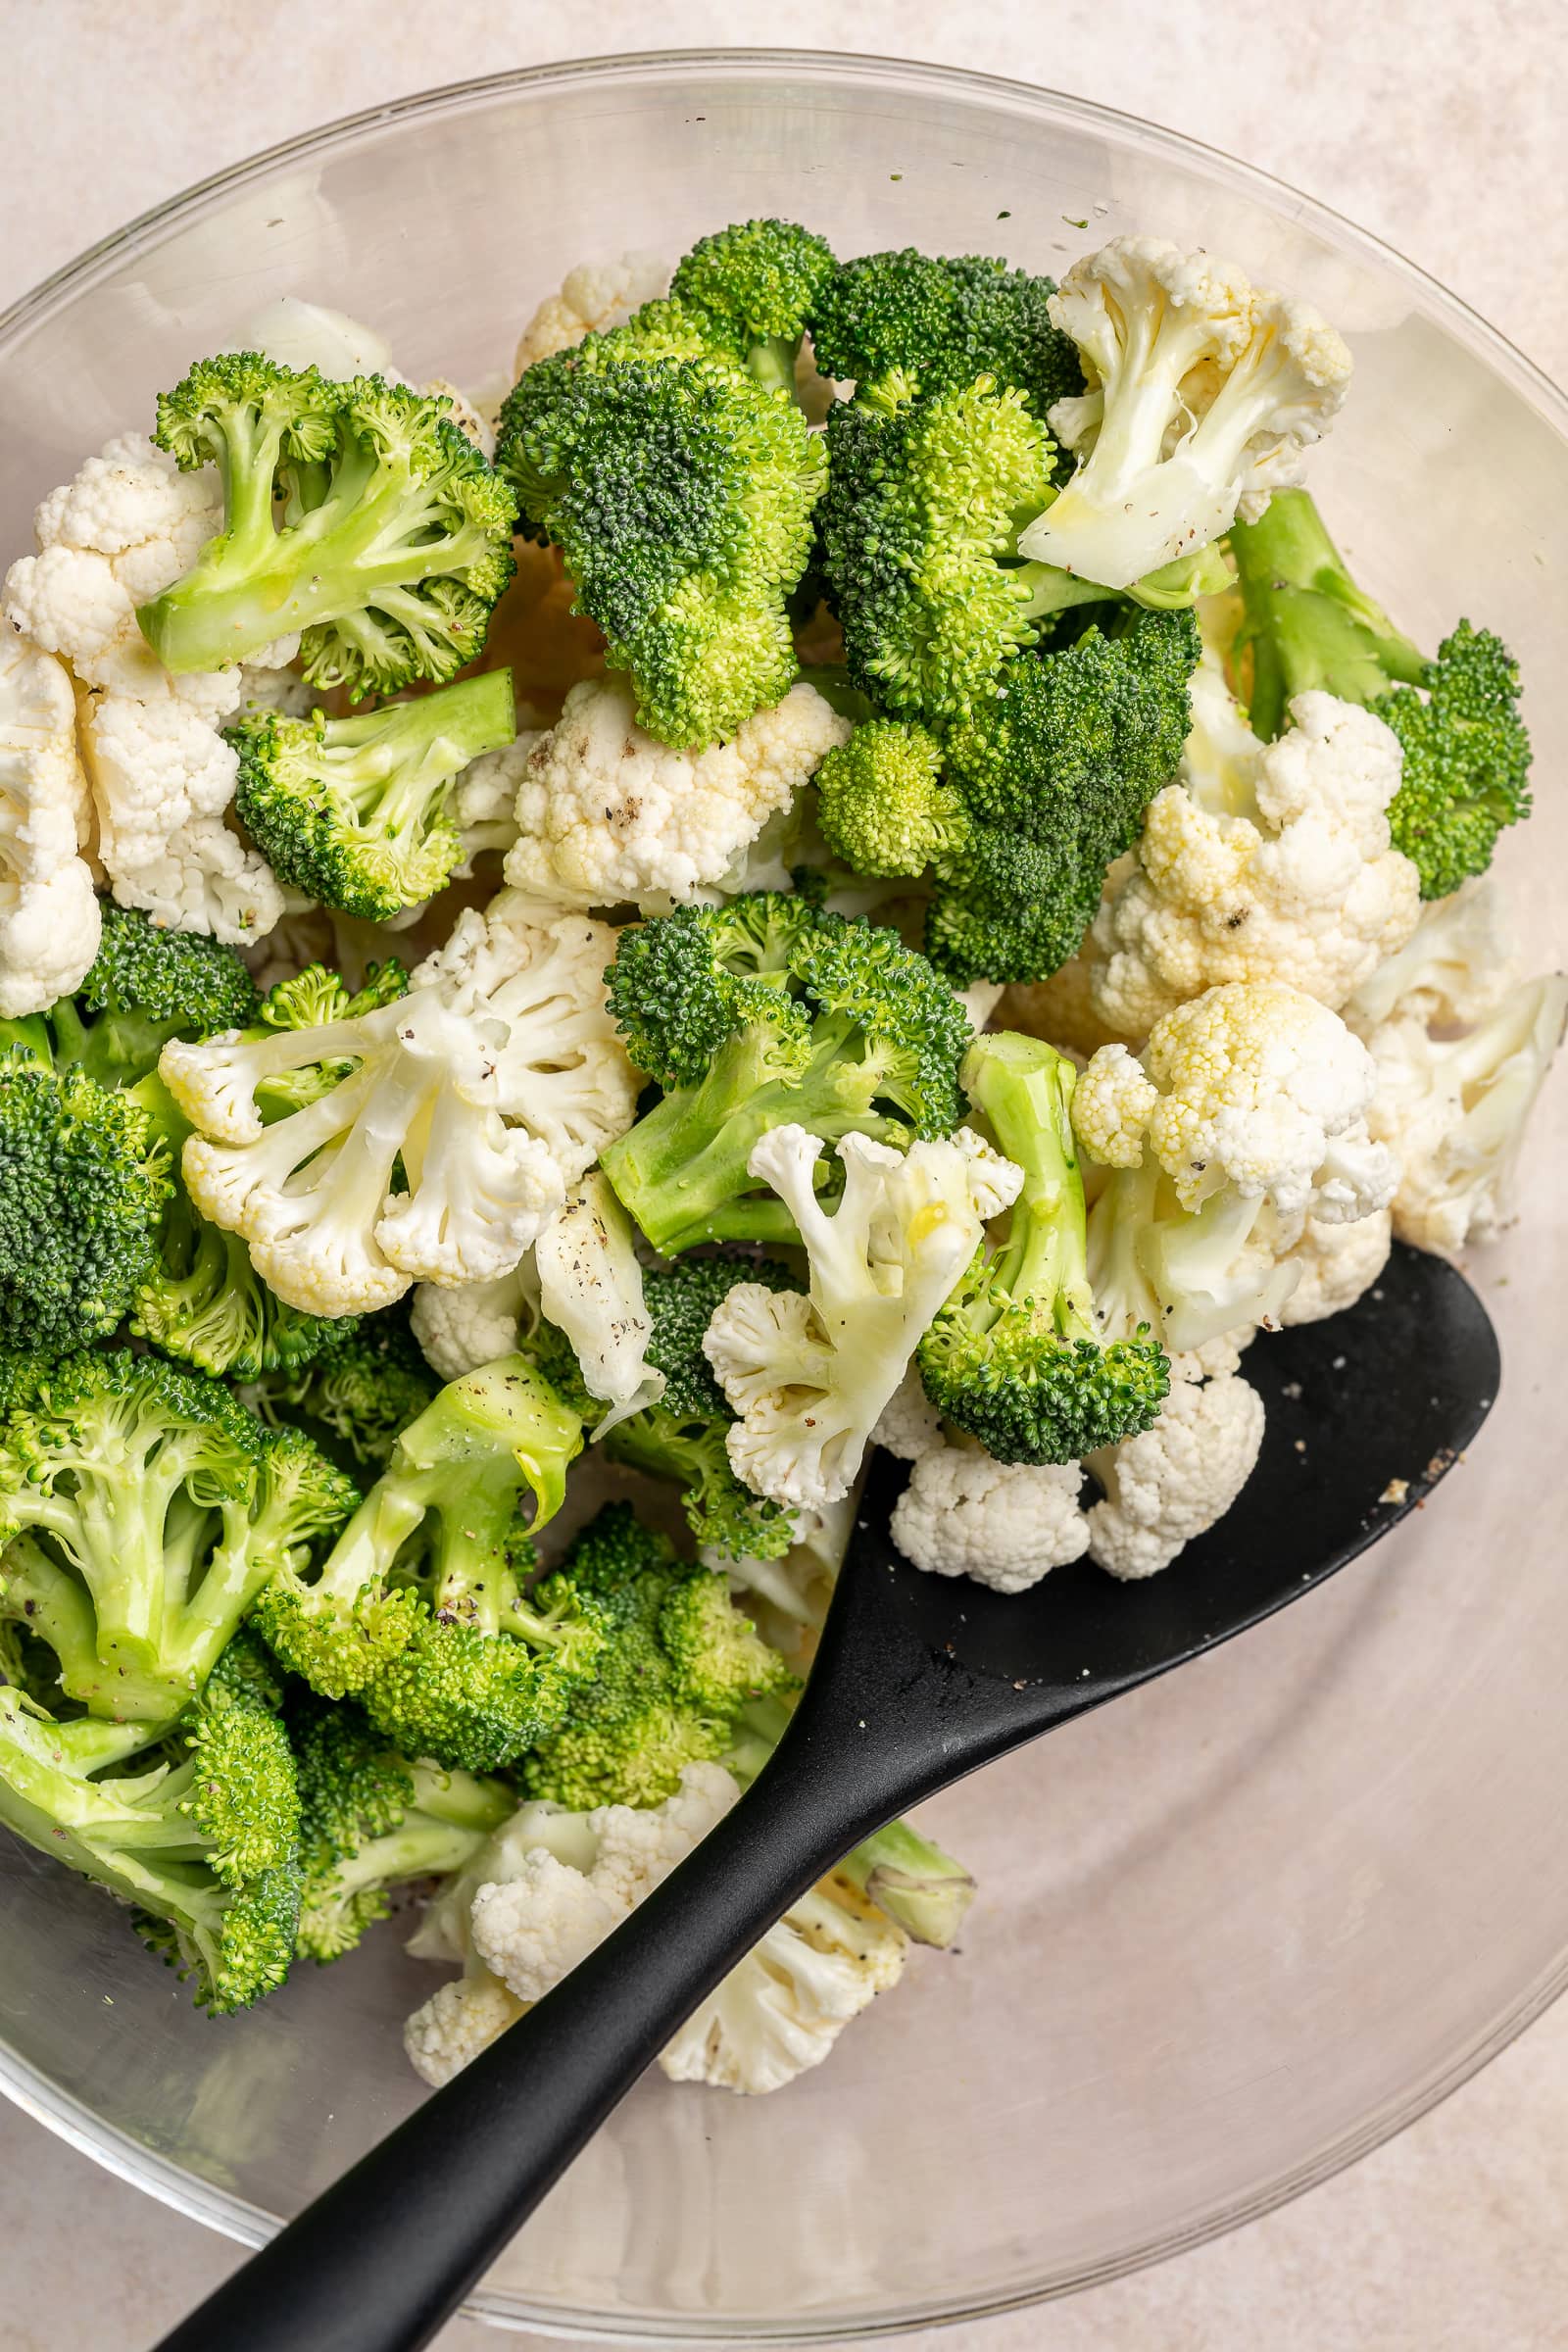 garlic, broccoli, and cauliflower in a large bowl being tossed with olive oil, salt, and pepper.